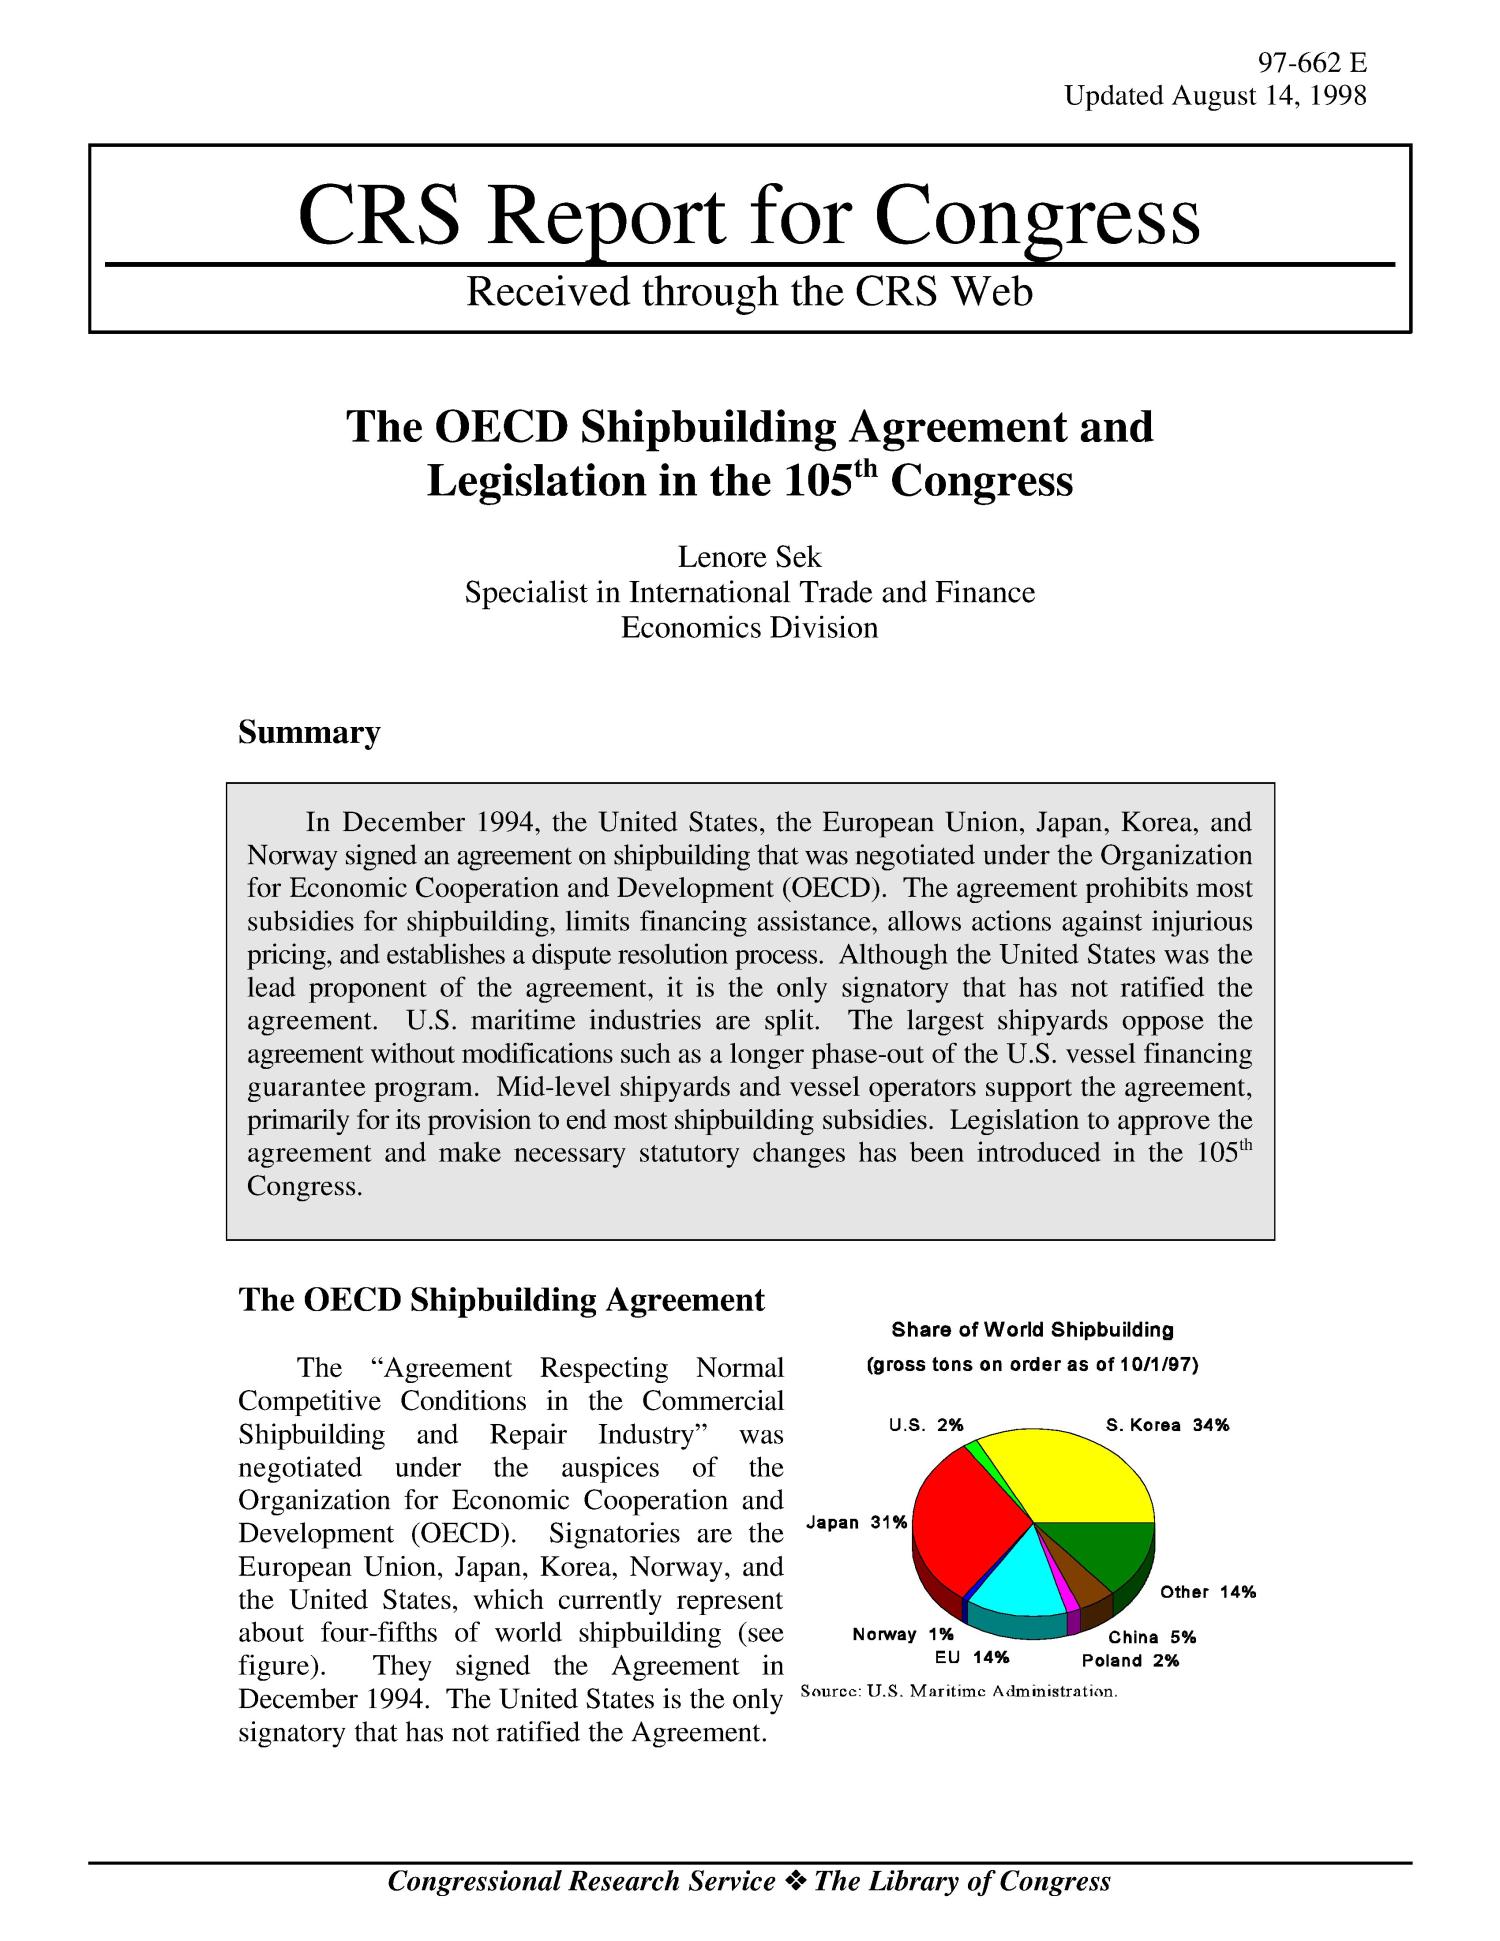 The OECD Shipbuilding Agreement and Legislation in the 105th Congress
                                                
                                                    [Sequence #]: 1 of 6
                                                